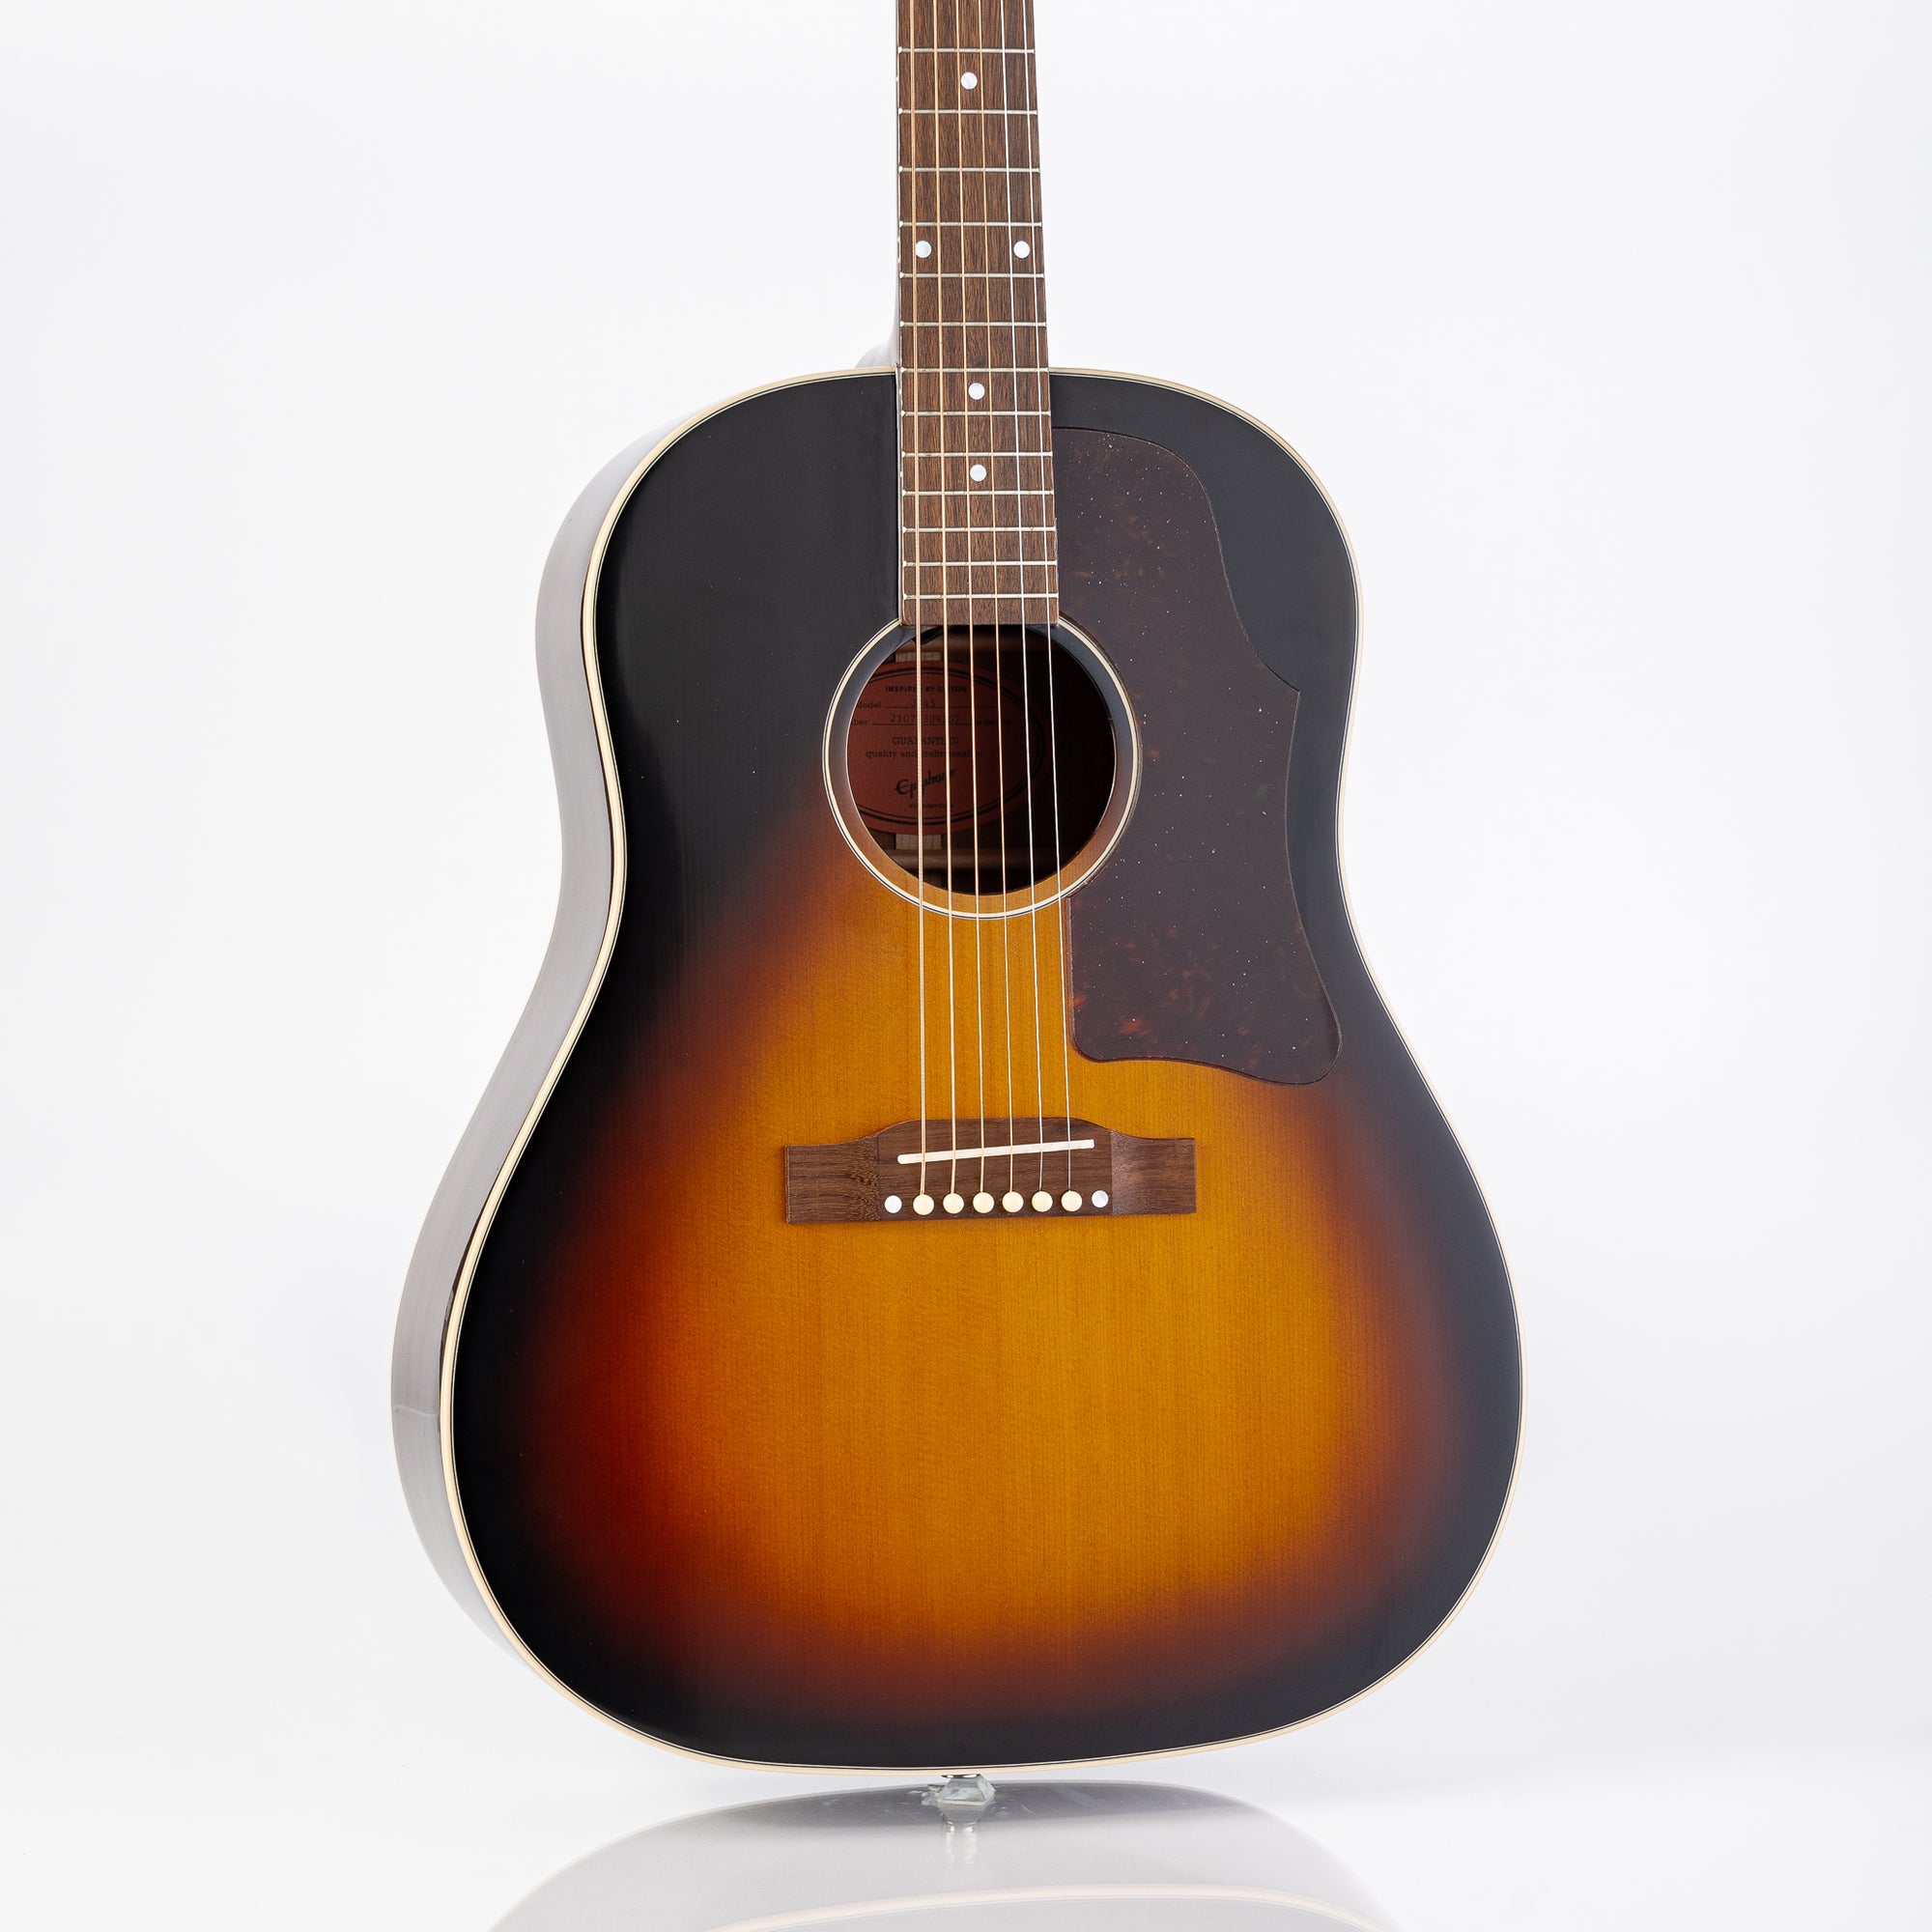 Epiphone Inspired By Gibson J-45 Acoustic Electric Guitar - Aged Vintage Sunburst Gloss